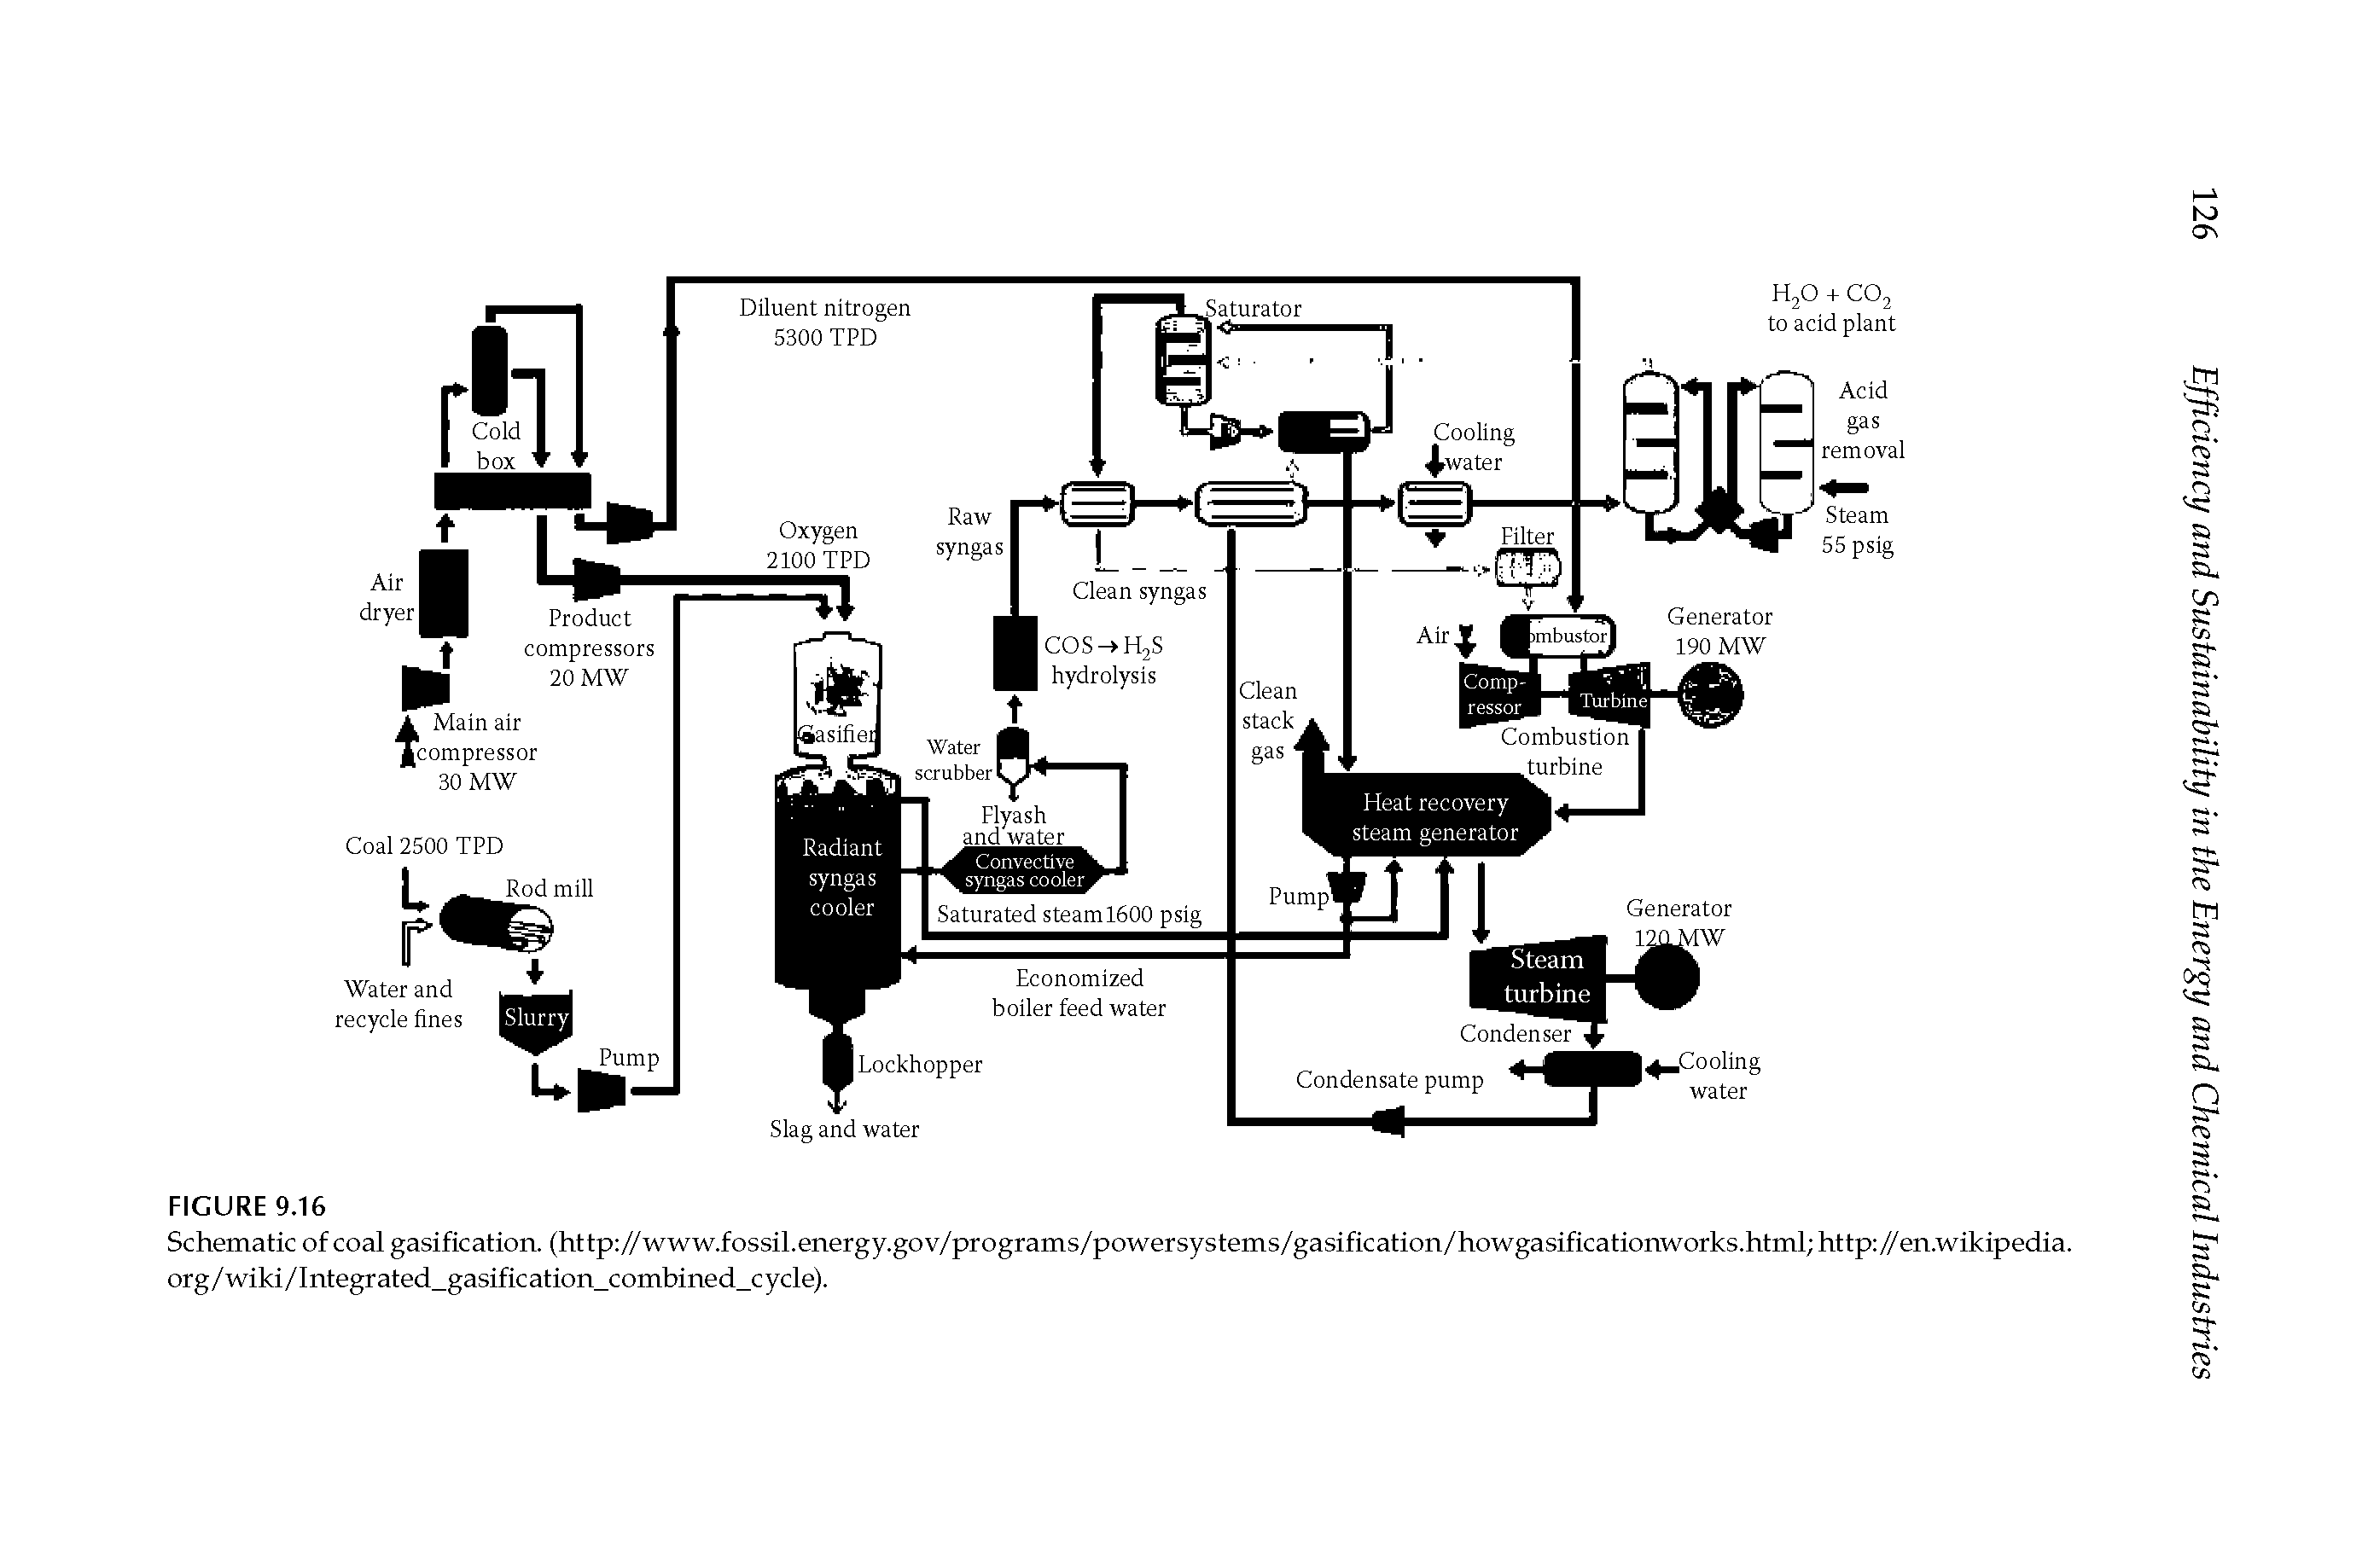 Schematic of coal gasification. (http //www.fossil.energy.gov/programs/powersystems/gasification/howgasificationworks.html http //en.wikipedia. org/wiki/Integrated gasification combined cycle).